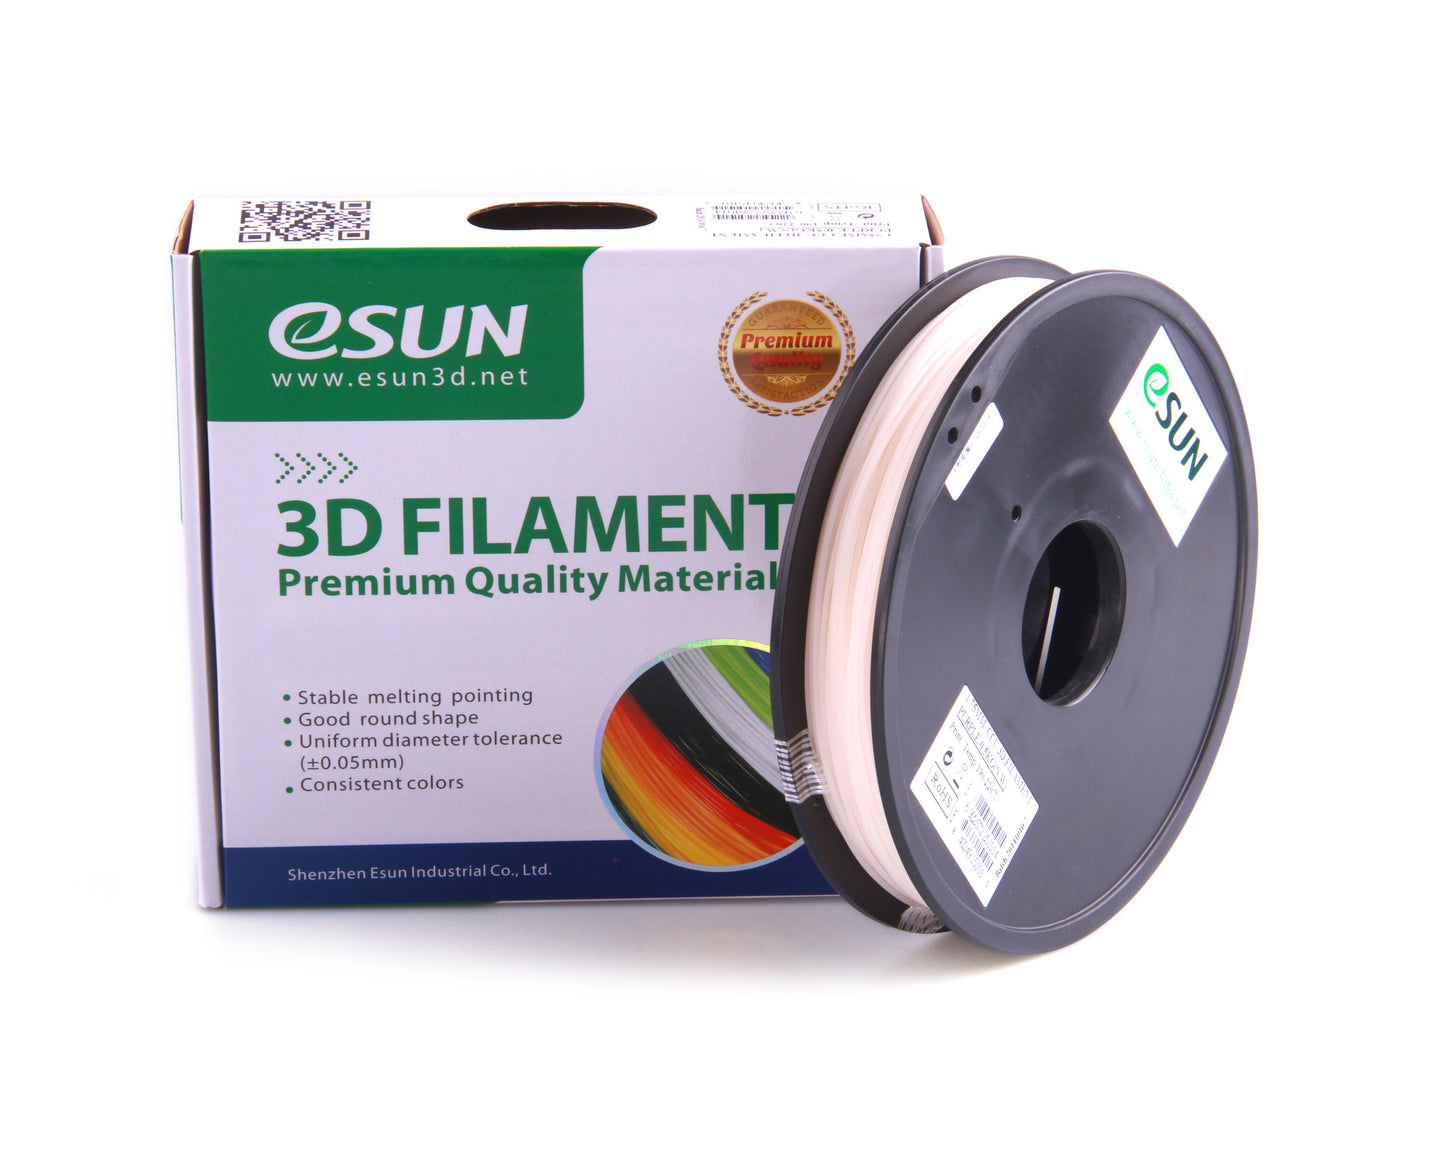 Clearance eSUN COLOR-CHANGING Filaments by Temperature 0.5kg Spool 1.75mm